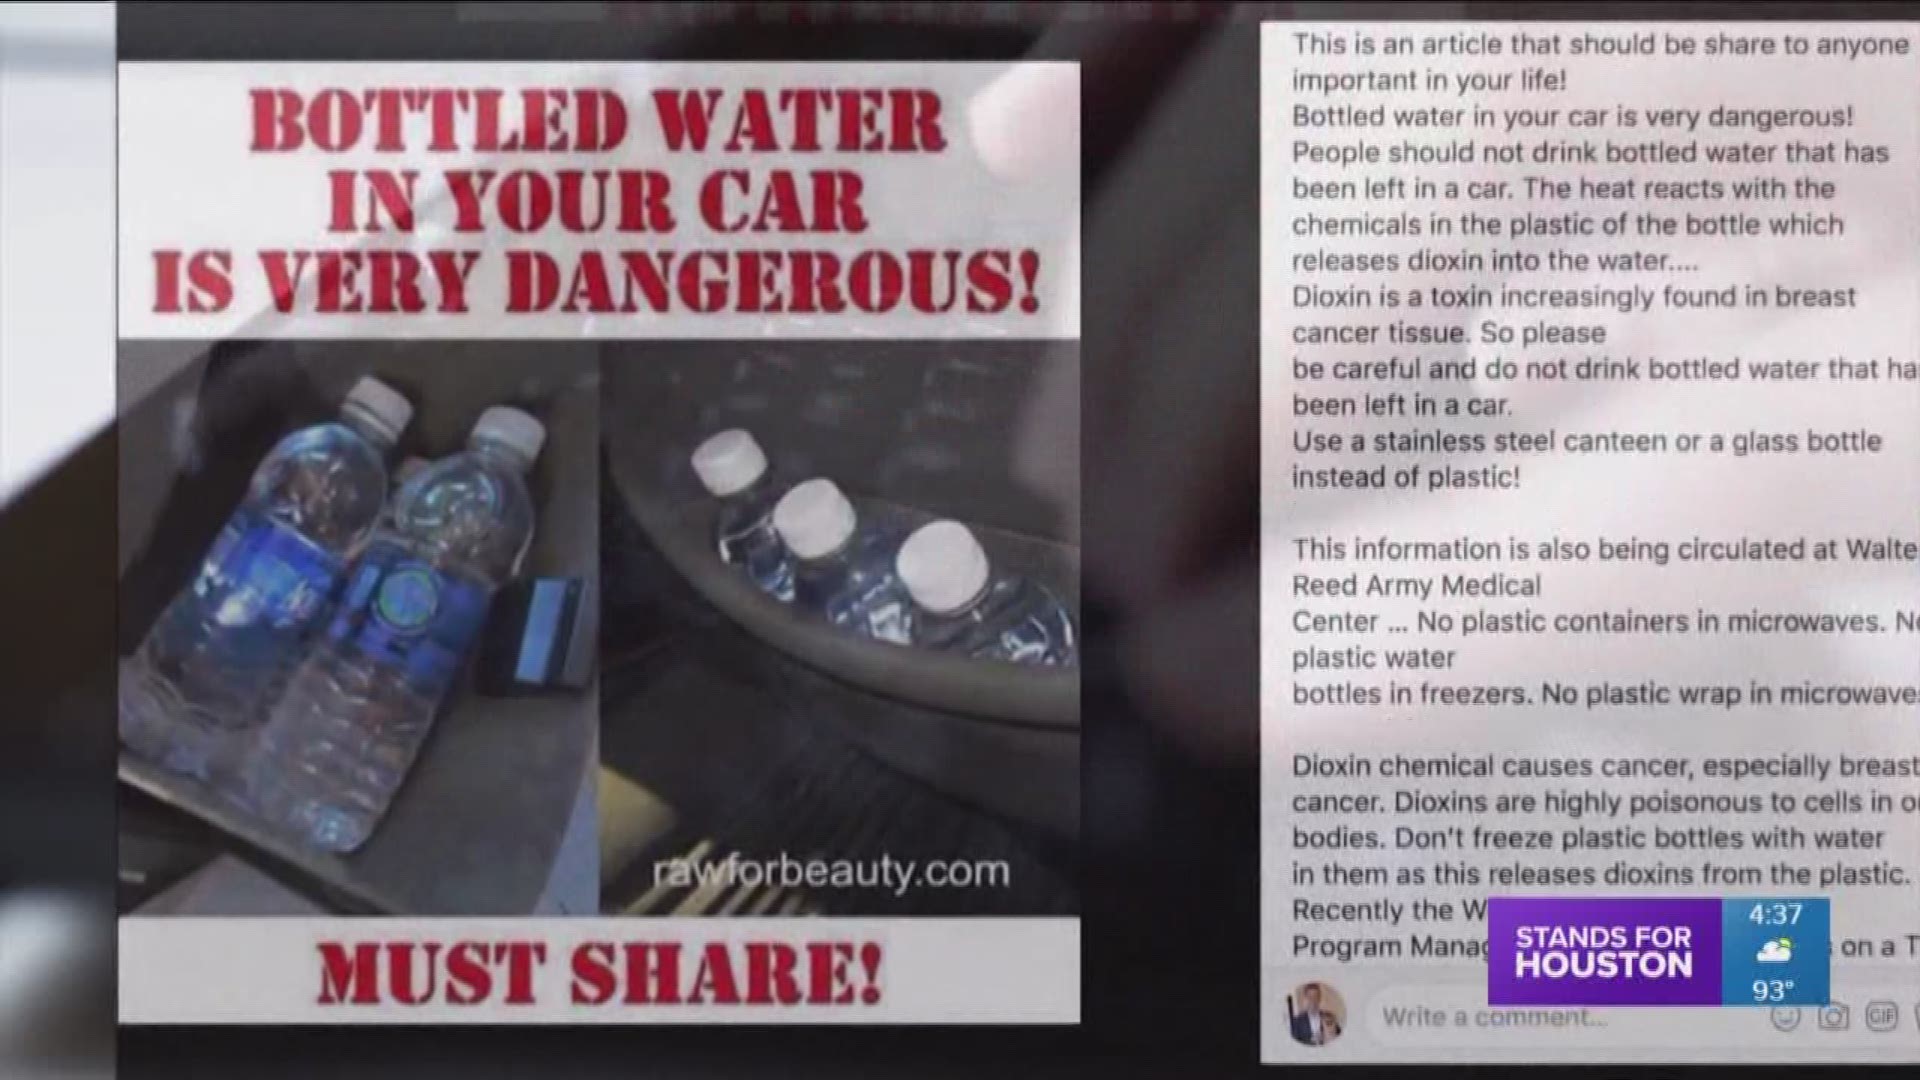 Is It Safe to Keep a Water Bottle in a Hot Car?